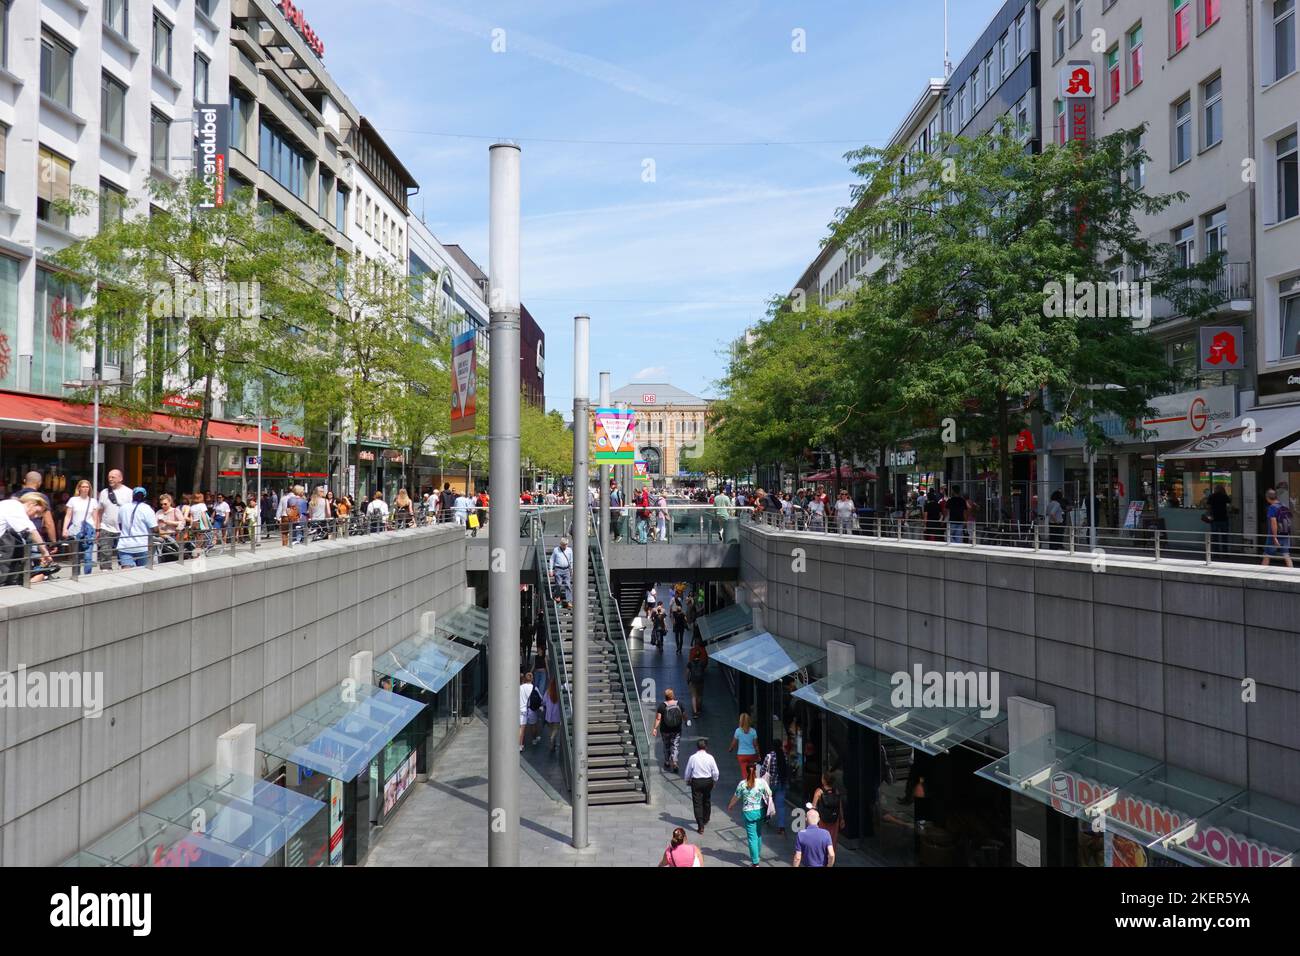 People shopping at Bahnhofstrasse and Niki-de-Saint-Phalle-Promenade in Hannover, Germany Stock Photo